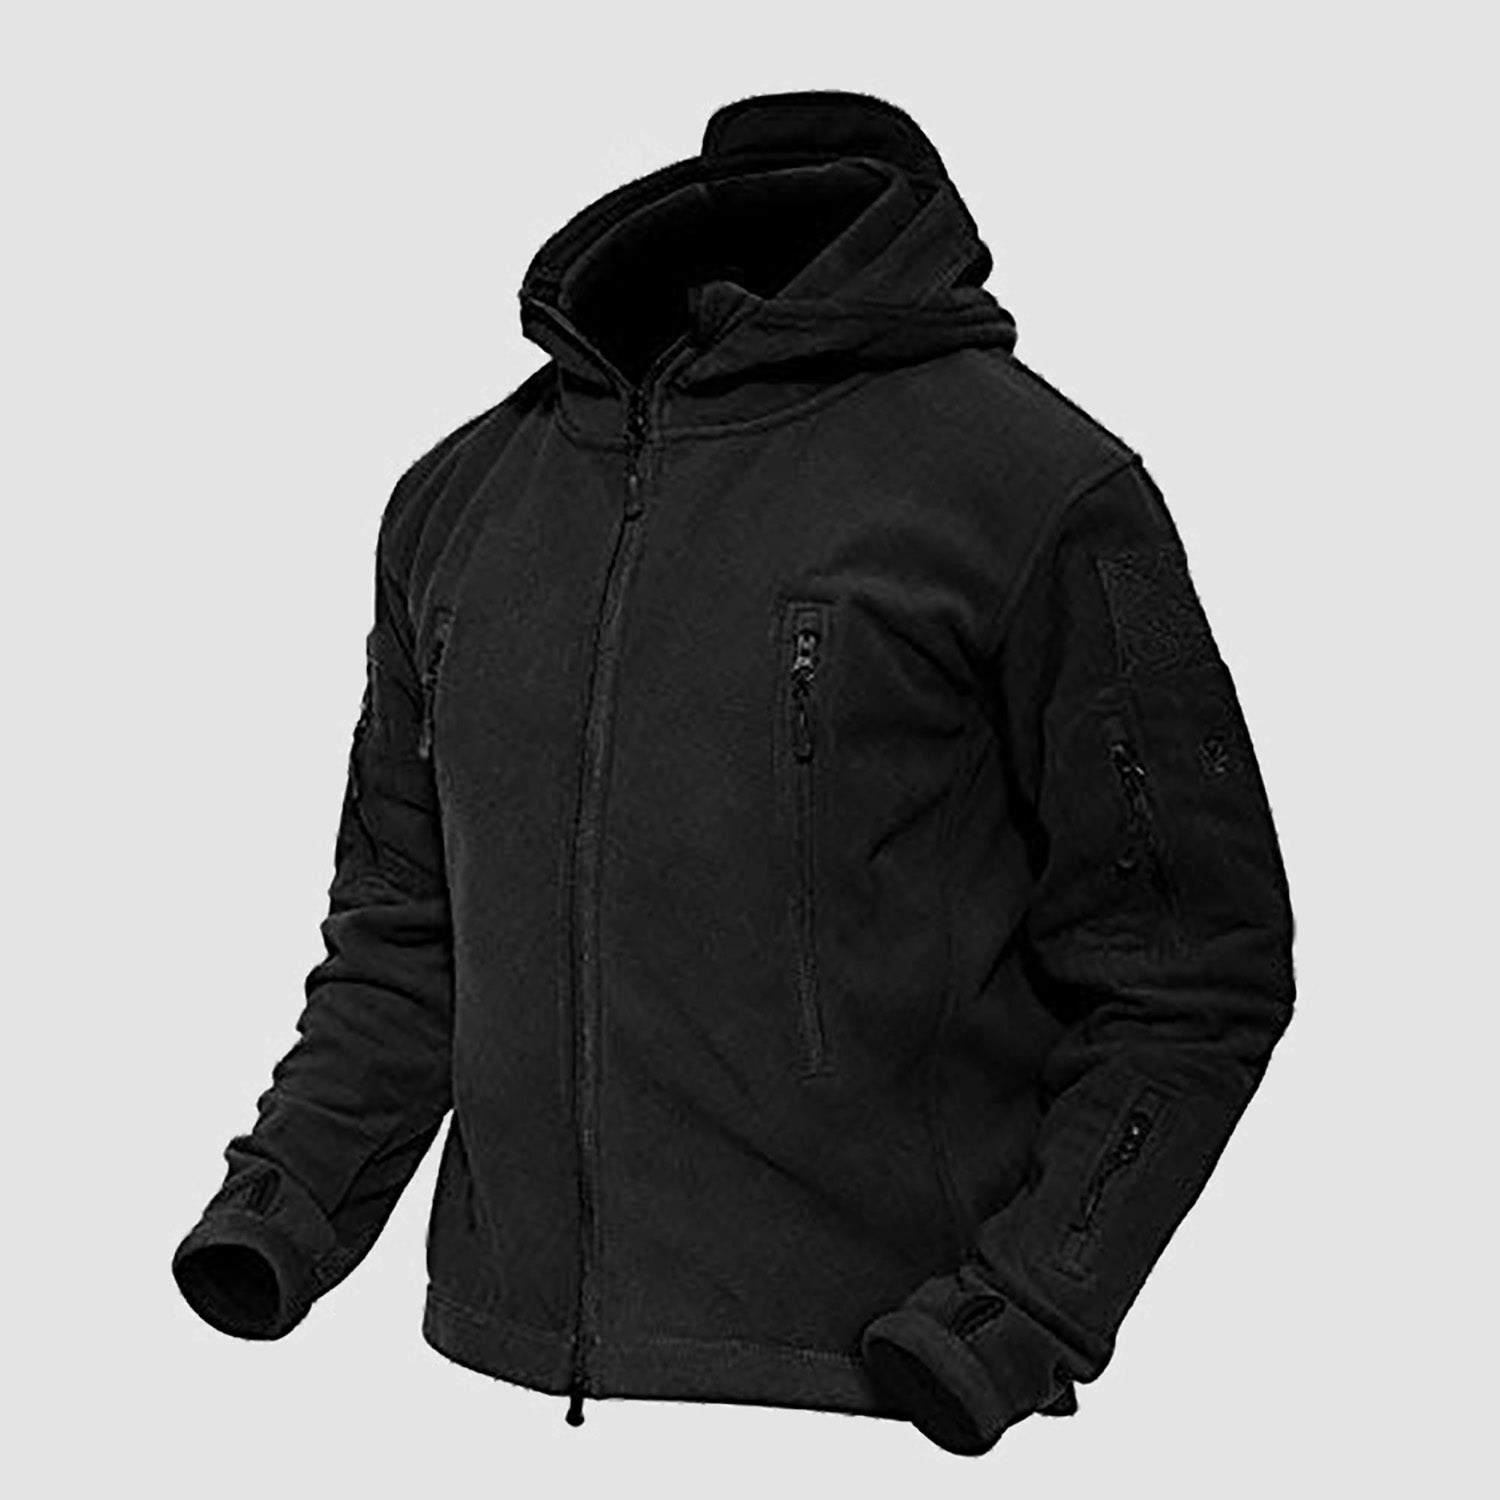 Men's Military Tactical Hooded Jacket with 6 Zip-Pockets